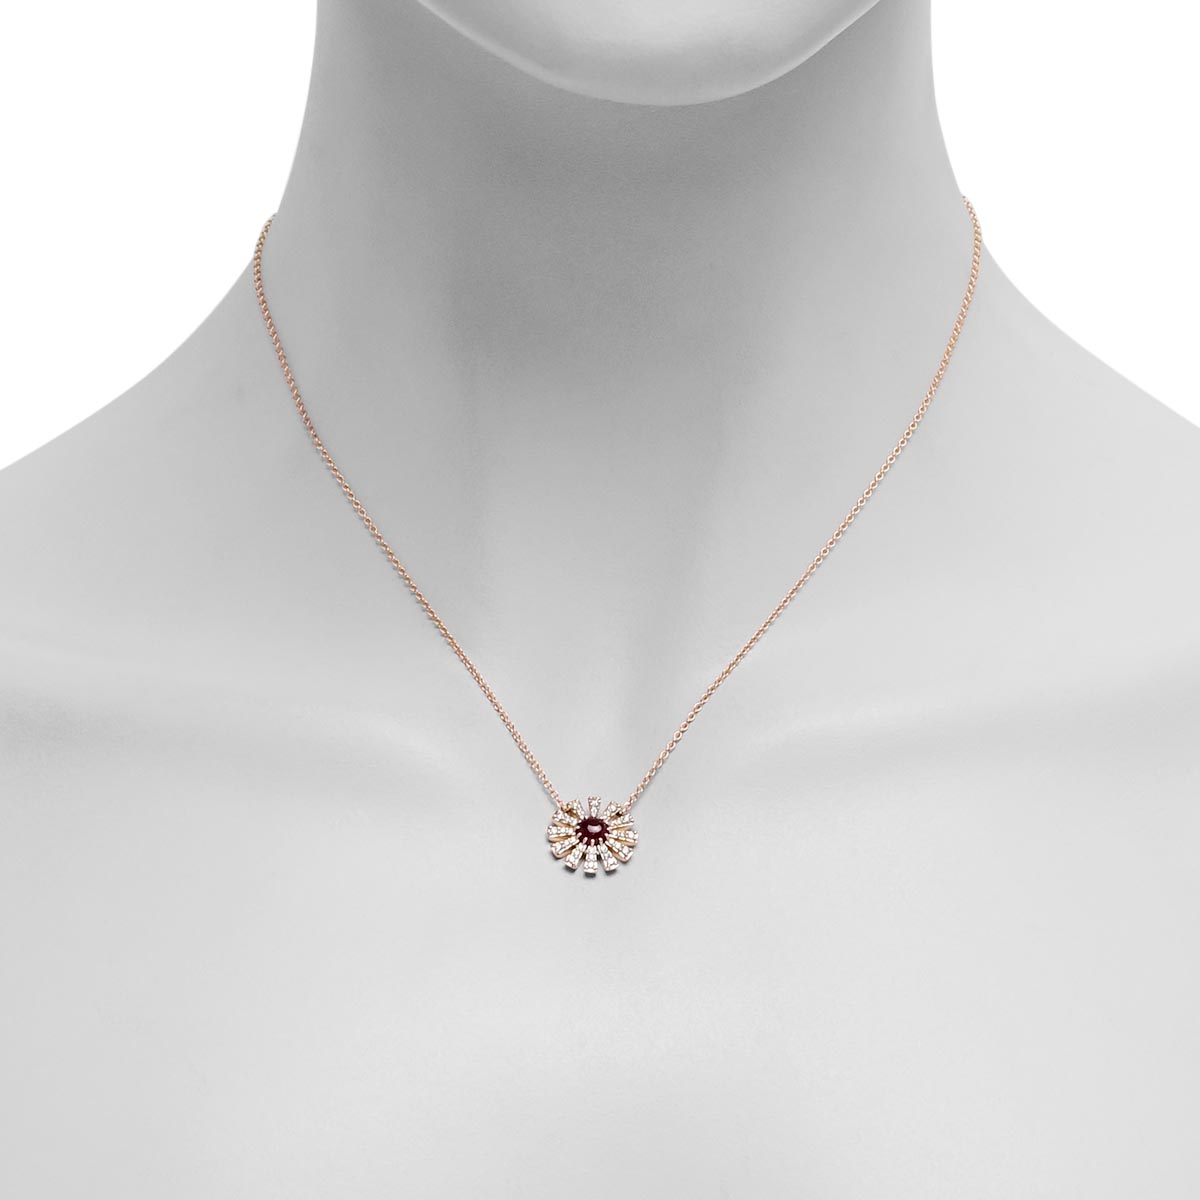 Greenland Ruby Necklace in 10kt Yellow Gold with Diamonds (1/4ct tw)